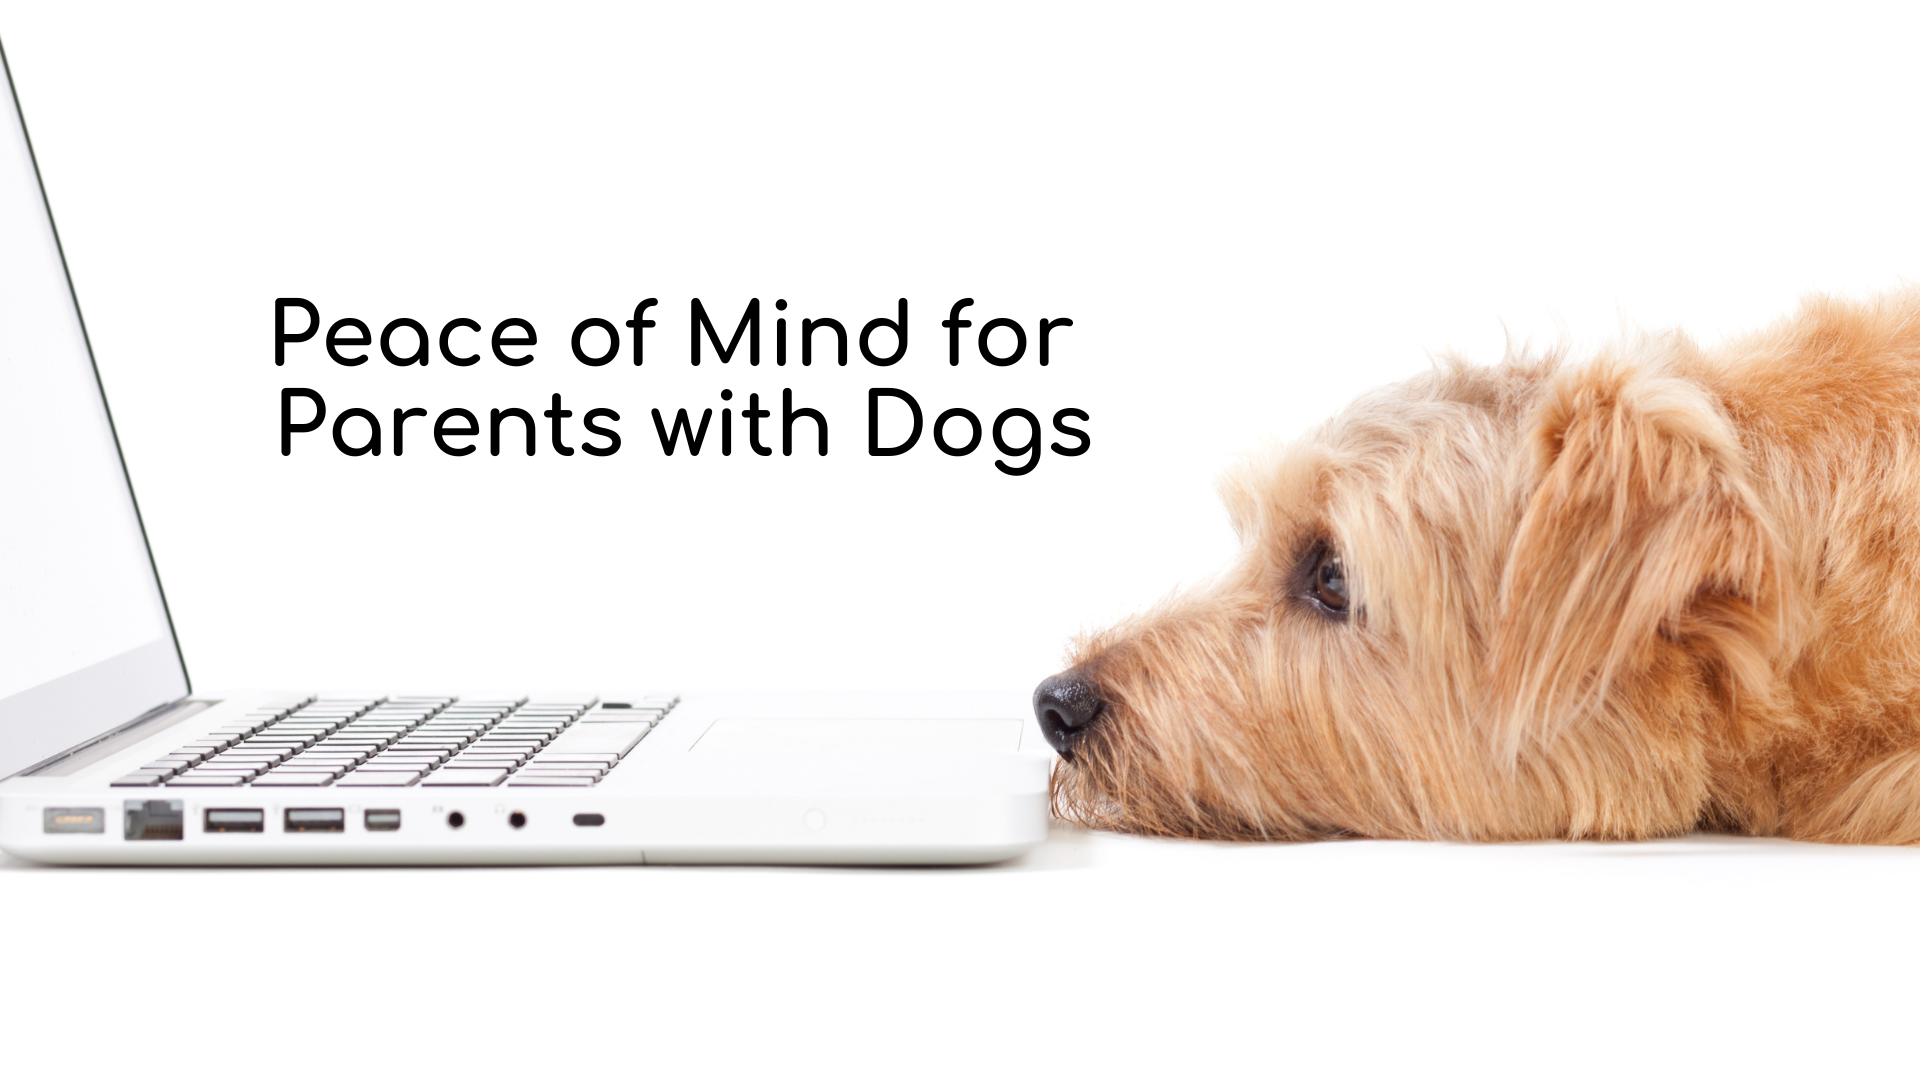 Peace of mind for parents with dogs